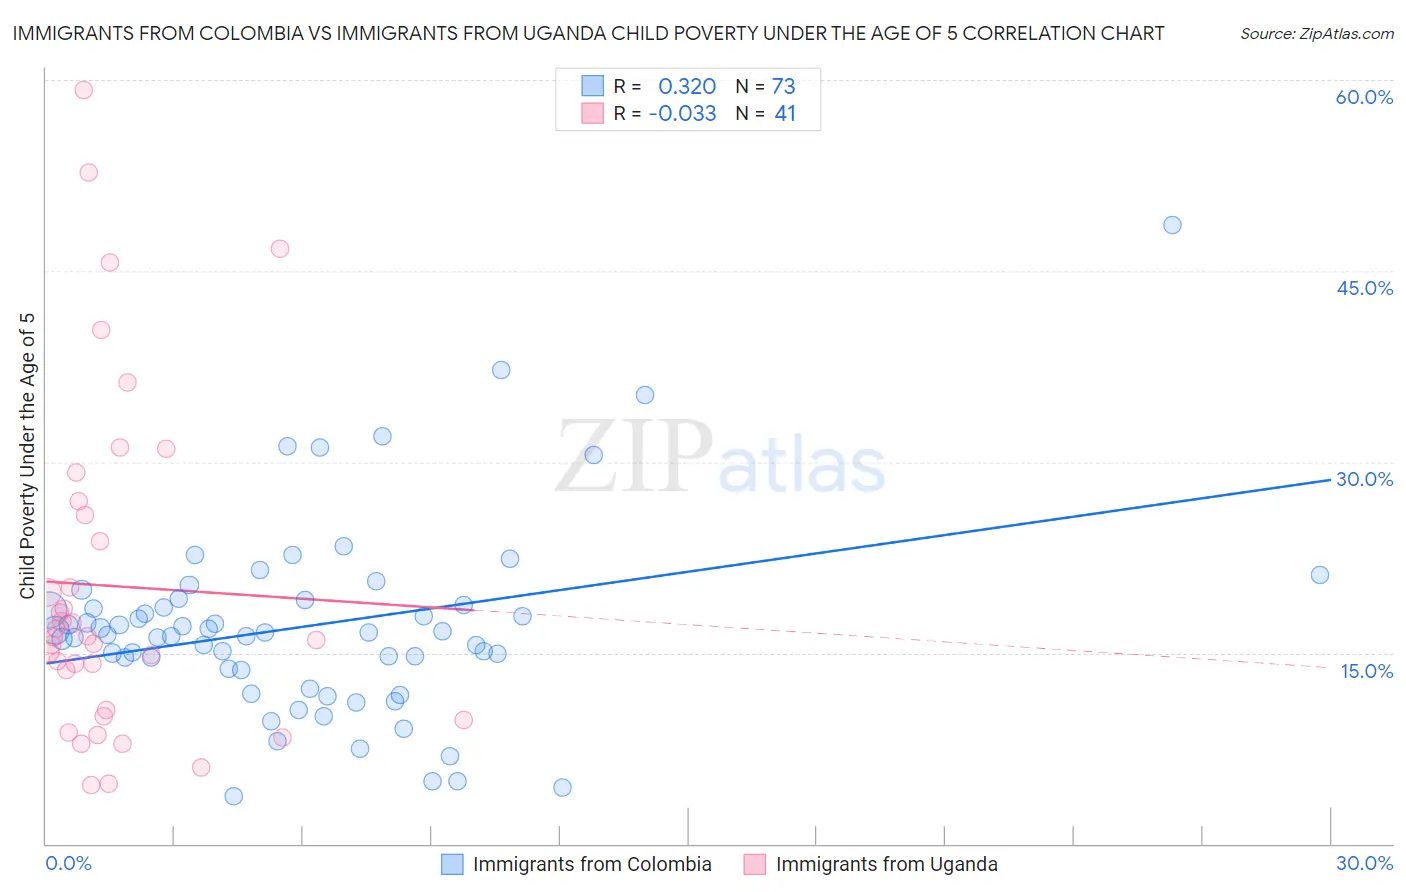 Immigrants from Colombia vs Immigrants from Uganda Child Poverty Under the Age of 5